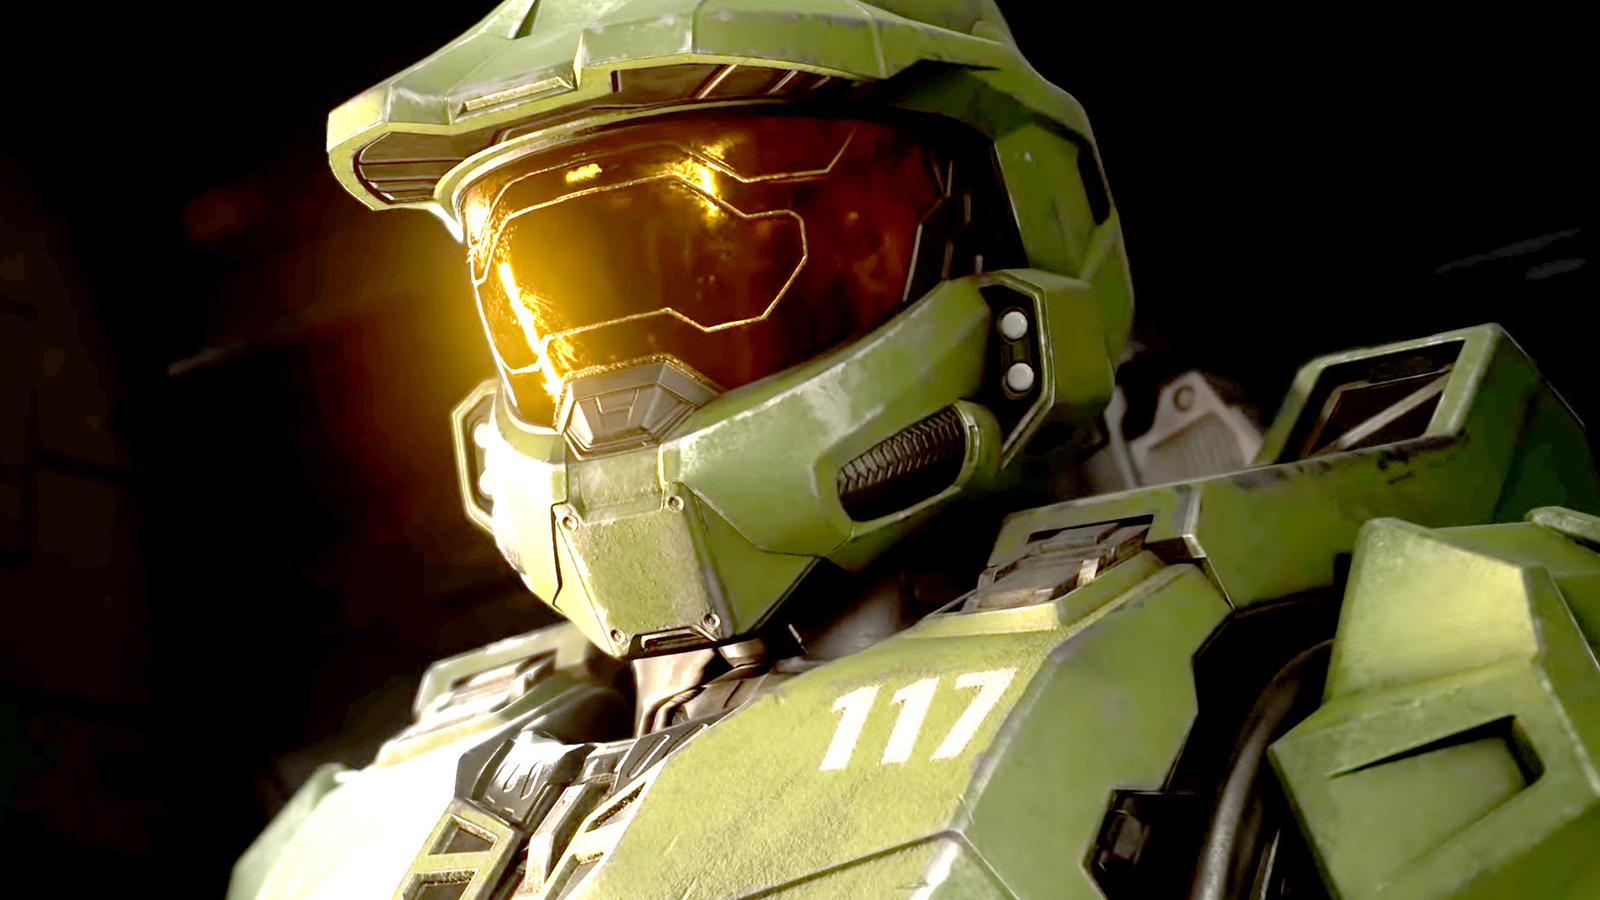 Inside 'Halo': How Paramount Plus Is Bringing Master Chief to Life